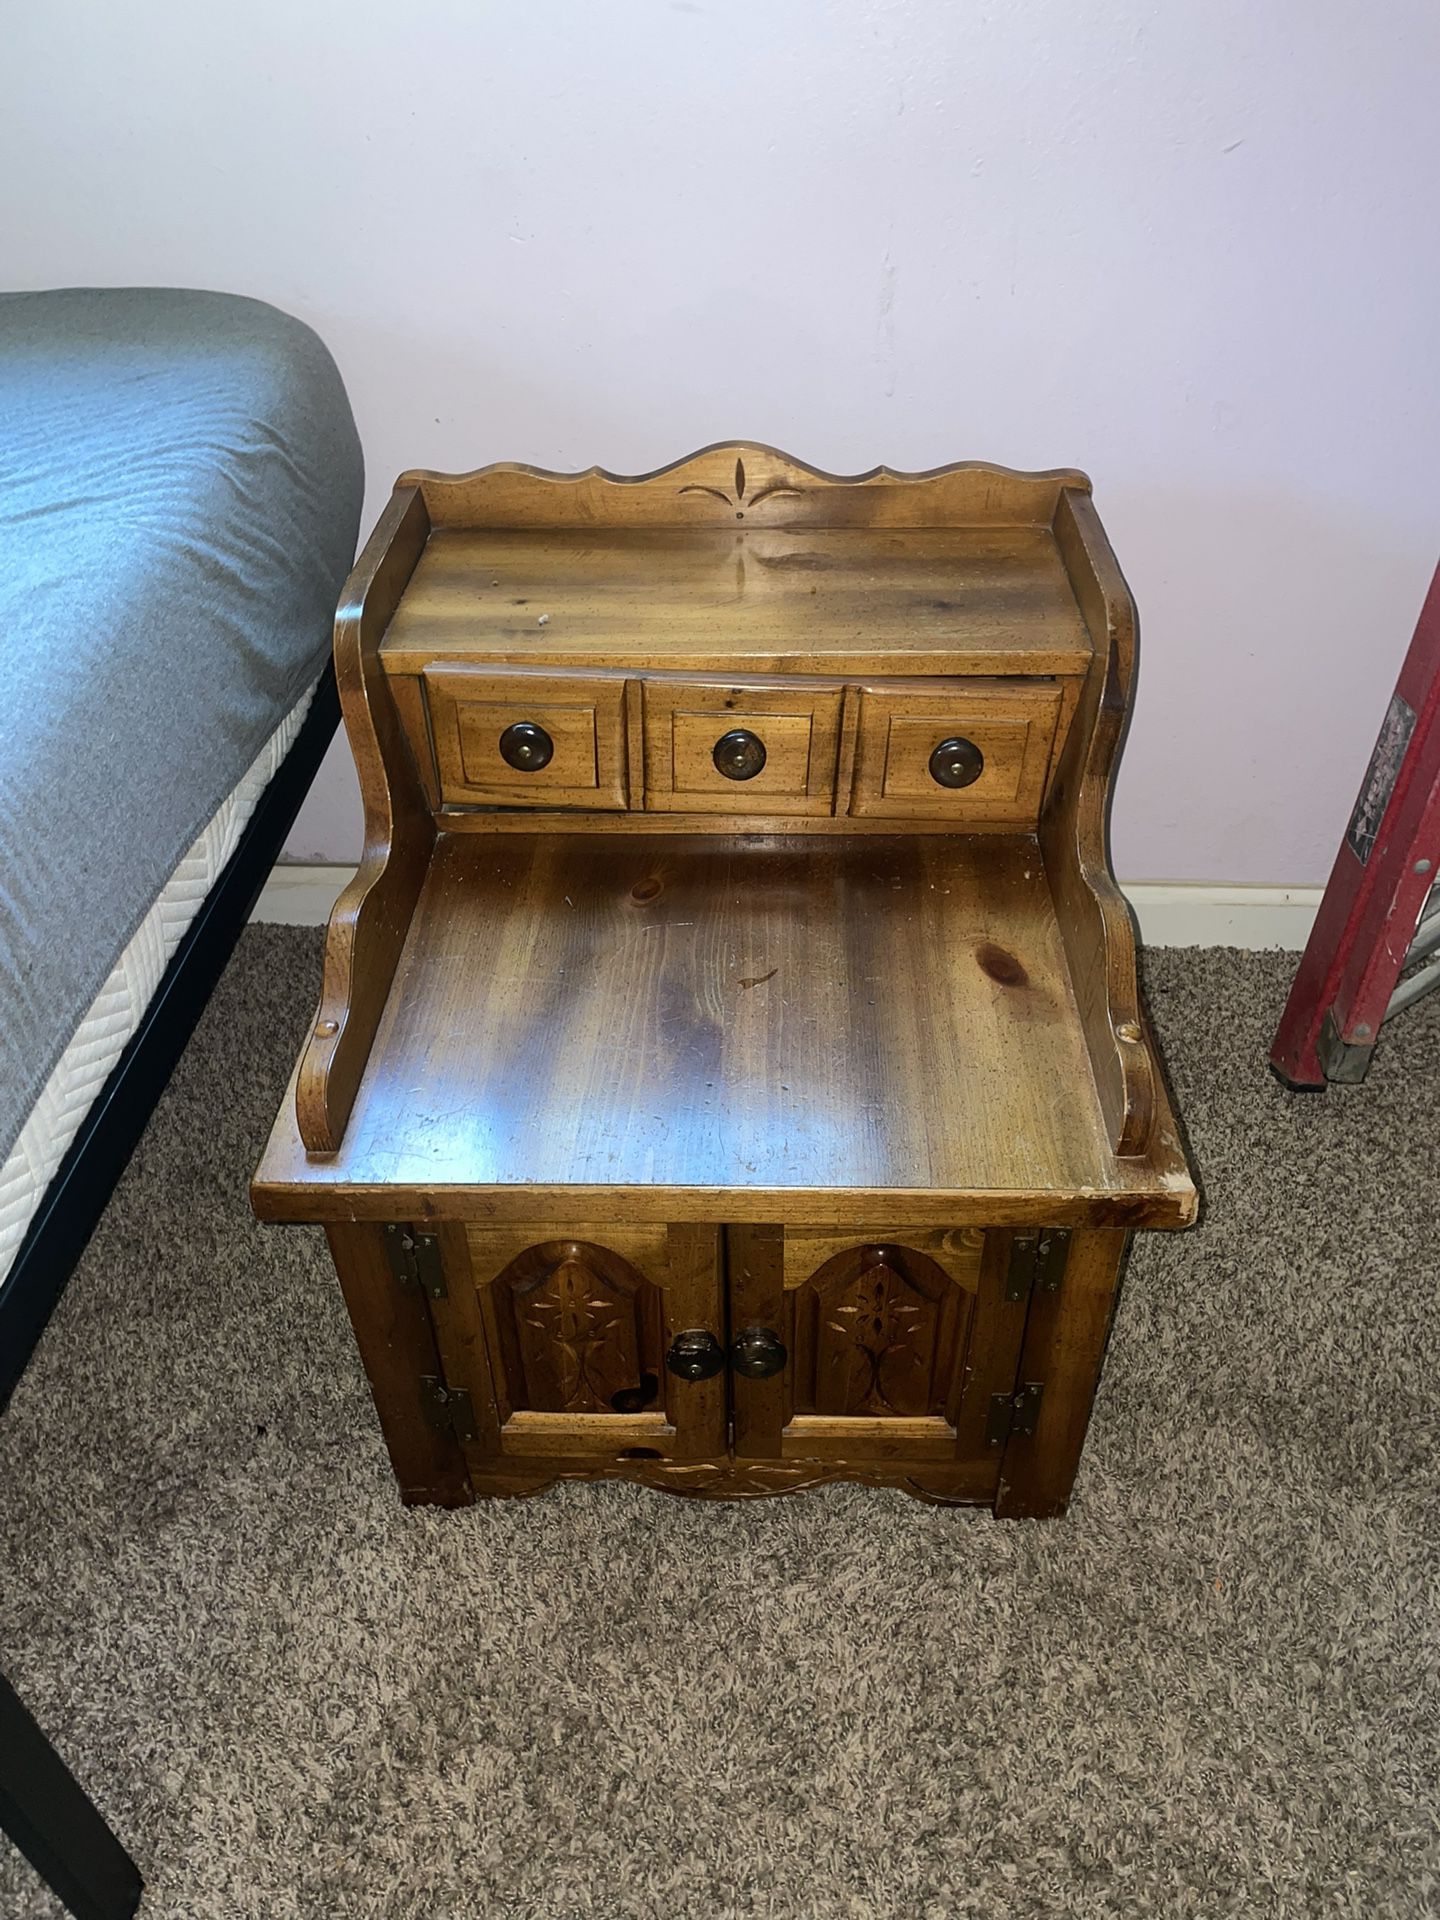 Antique Side table